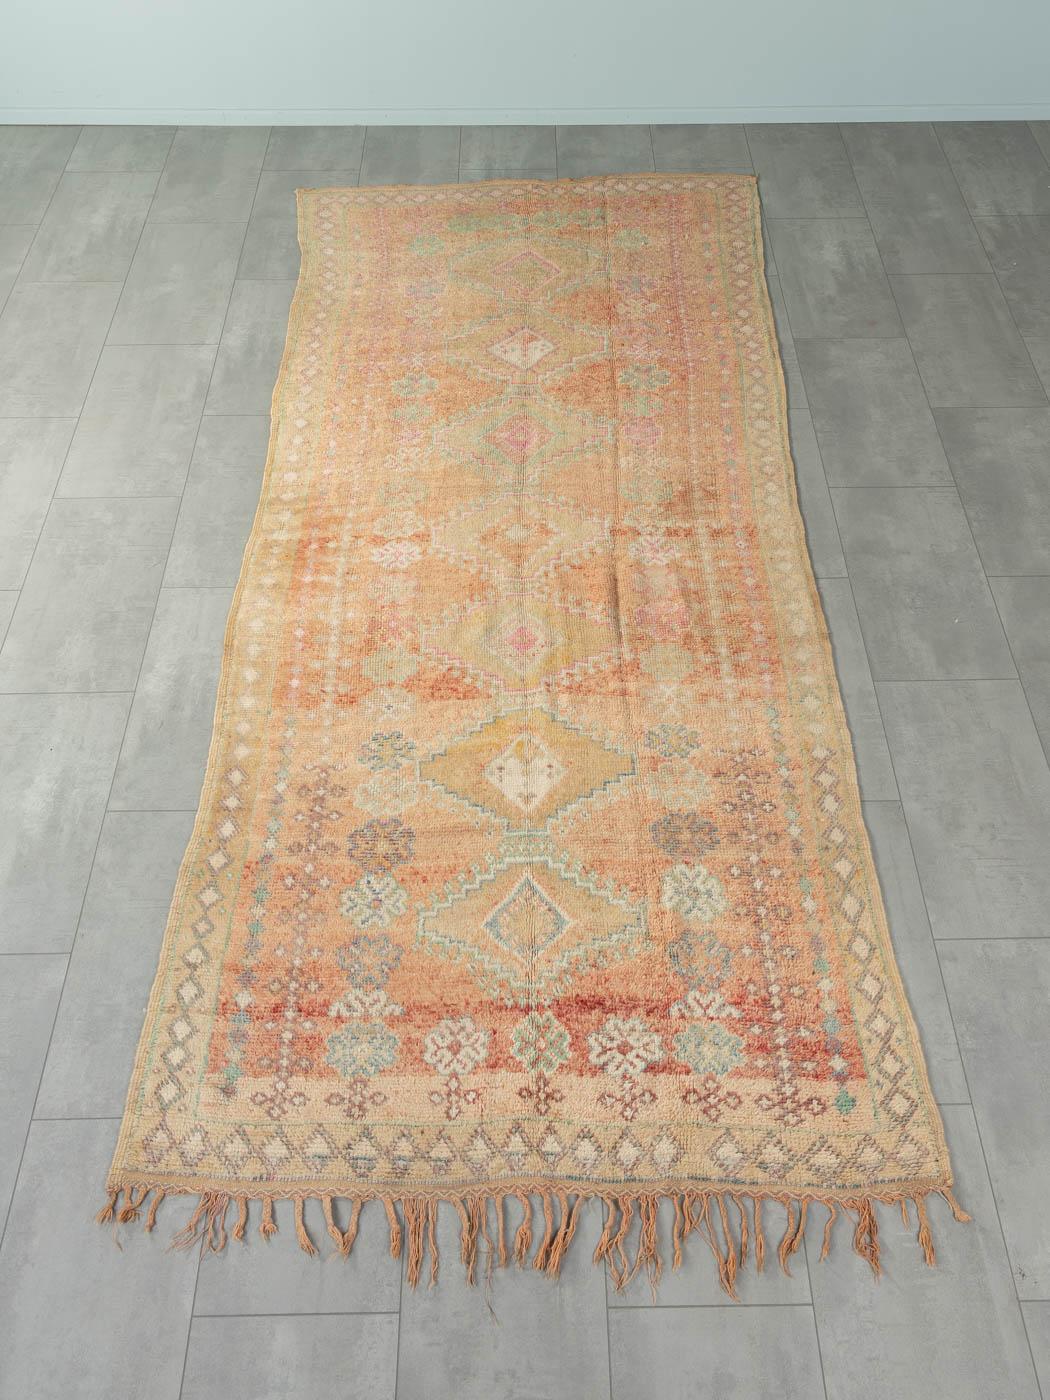 This Vintage Taznakht is a 100 % wool rug – soft and comfortable underfoot. Our Berber rugs are handmade, one knot at a time. Each of our Berber rugs is a long-lasting one-of-a-kind piece, created in a sustainable manner with local wool. 

Vintage